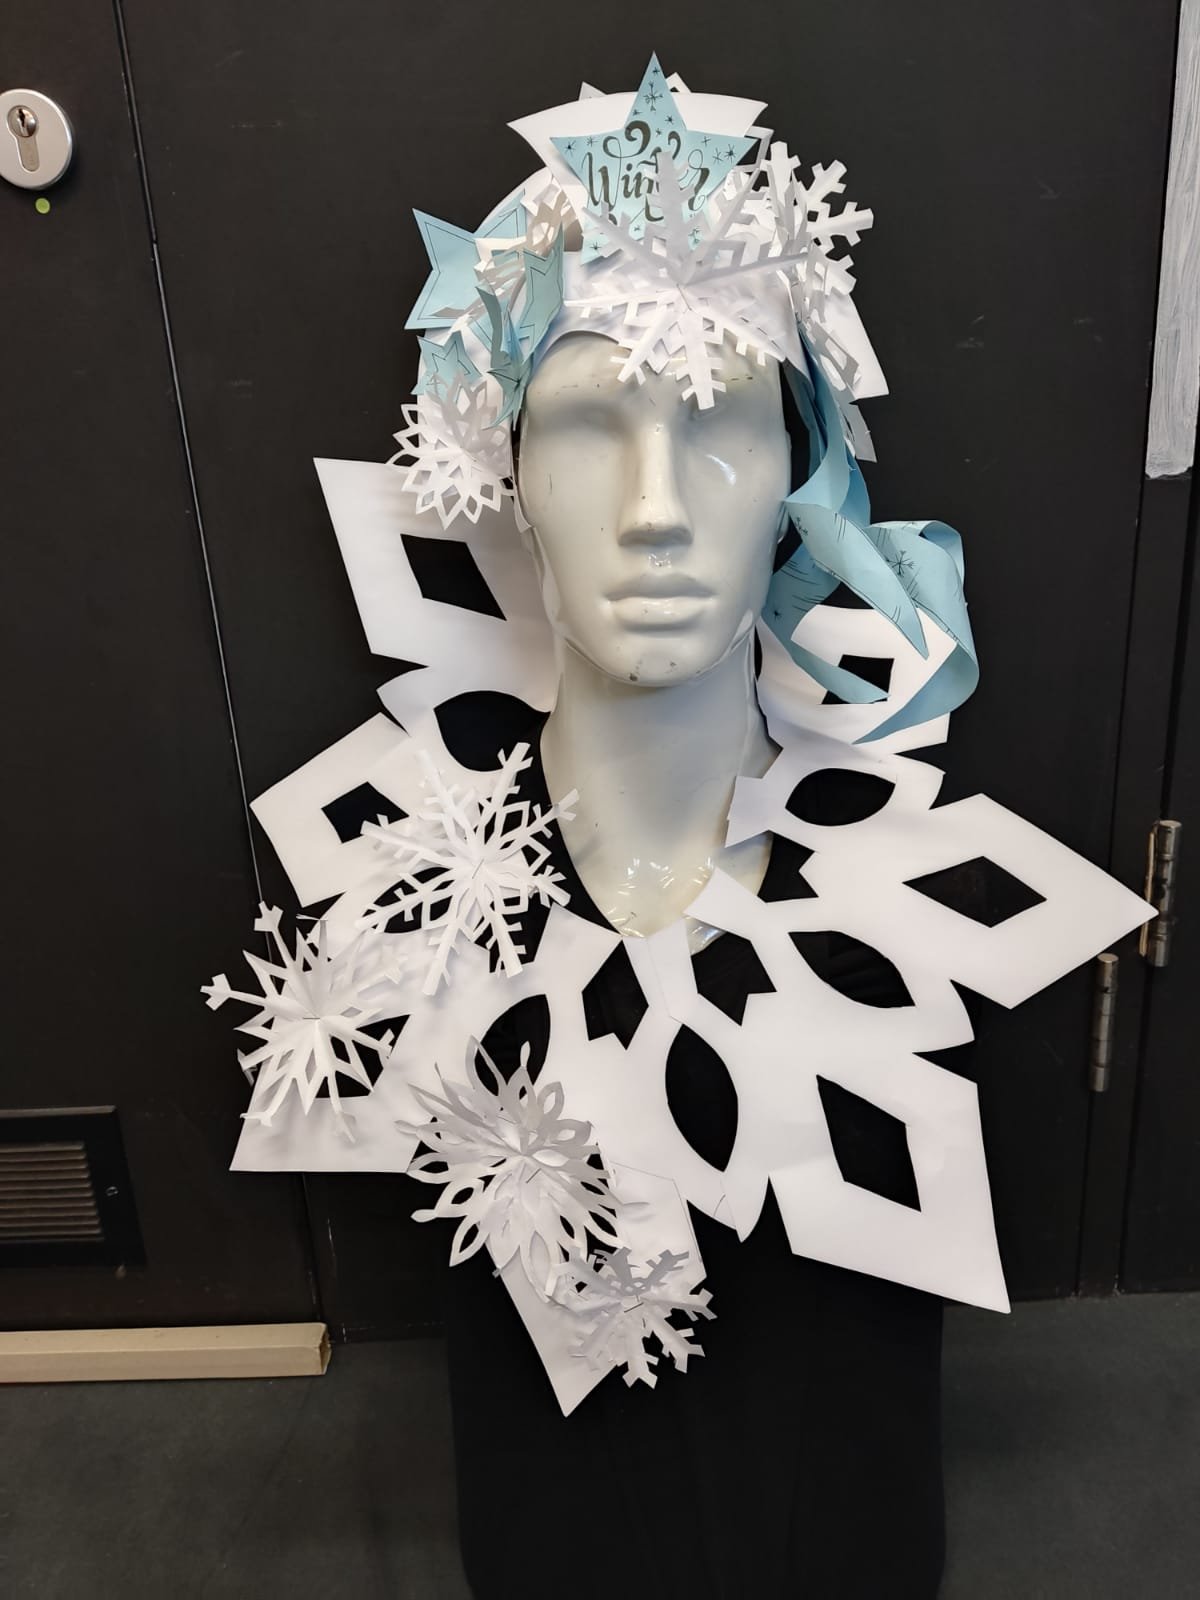 Snowflake Carnival Costume Made From Paper